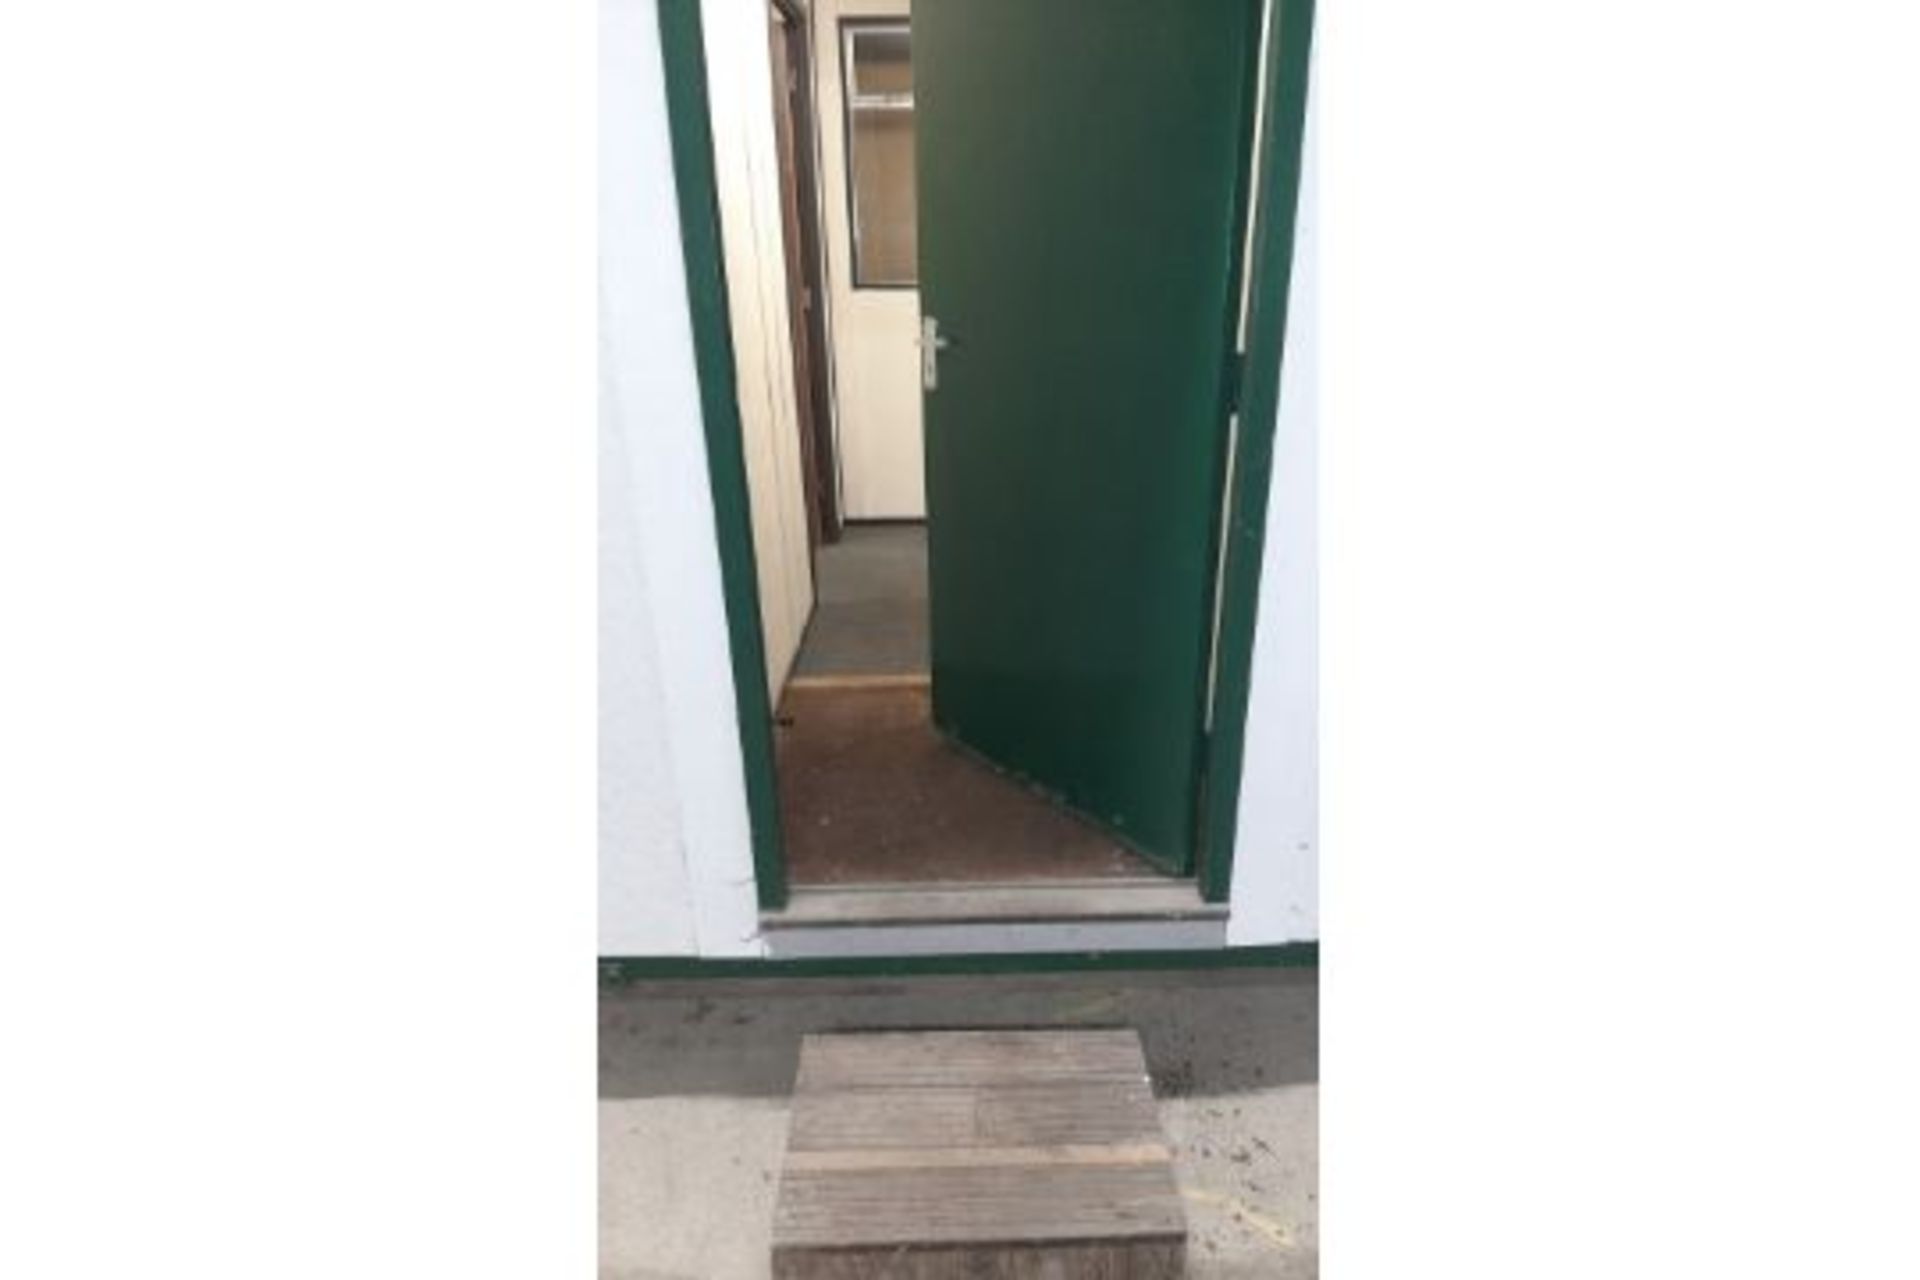 10ft x 32ft jack leg cabin. With two 10ftx 14ft rooms and hall. Used as office inside building. - Image 18 of 18